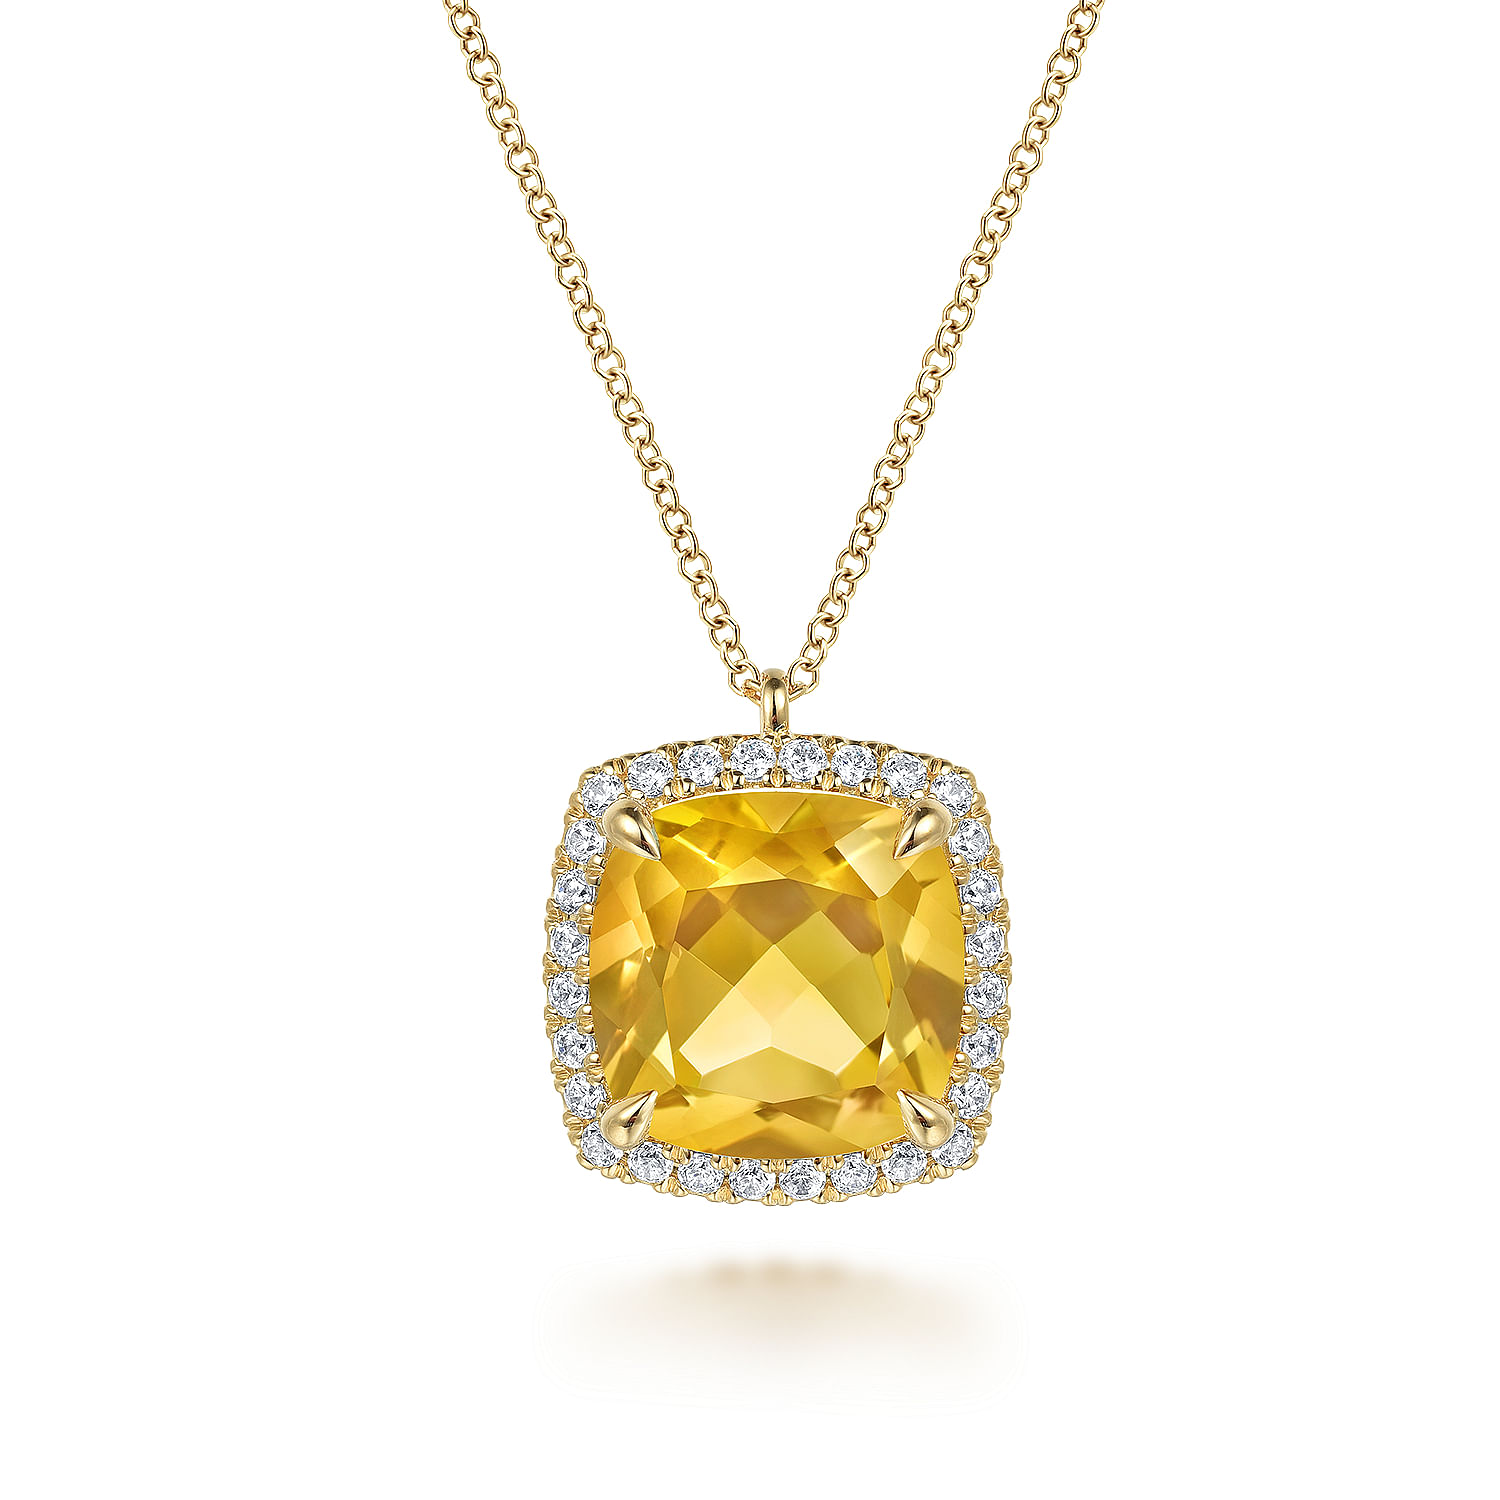 14K Yellow Gold Diamond and Citrine Cushion Cut Necklace With Flower Pattern J-Back